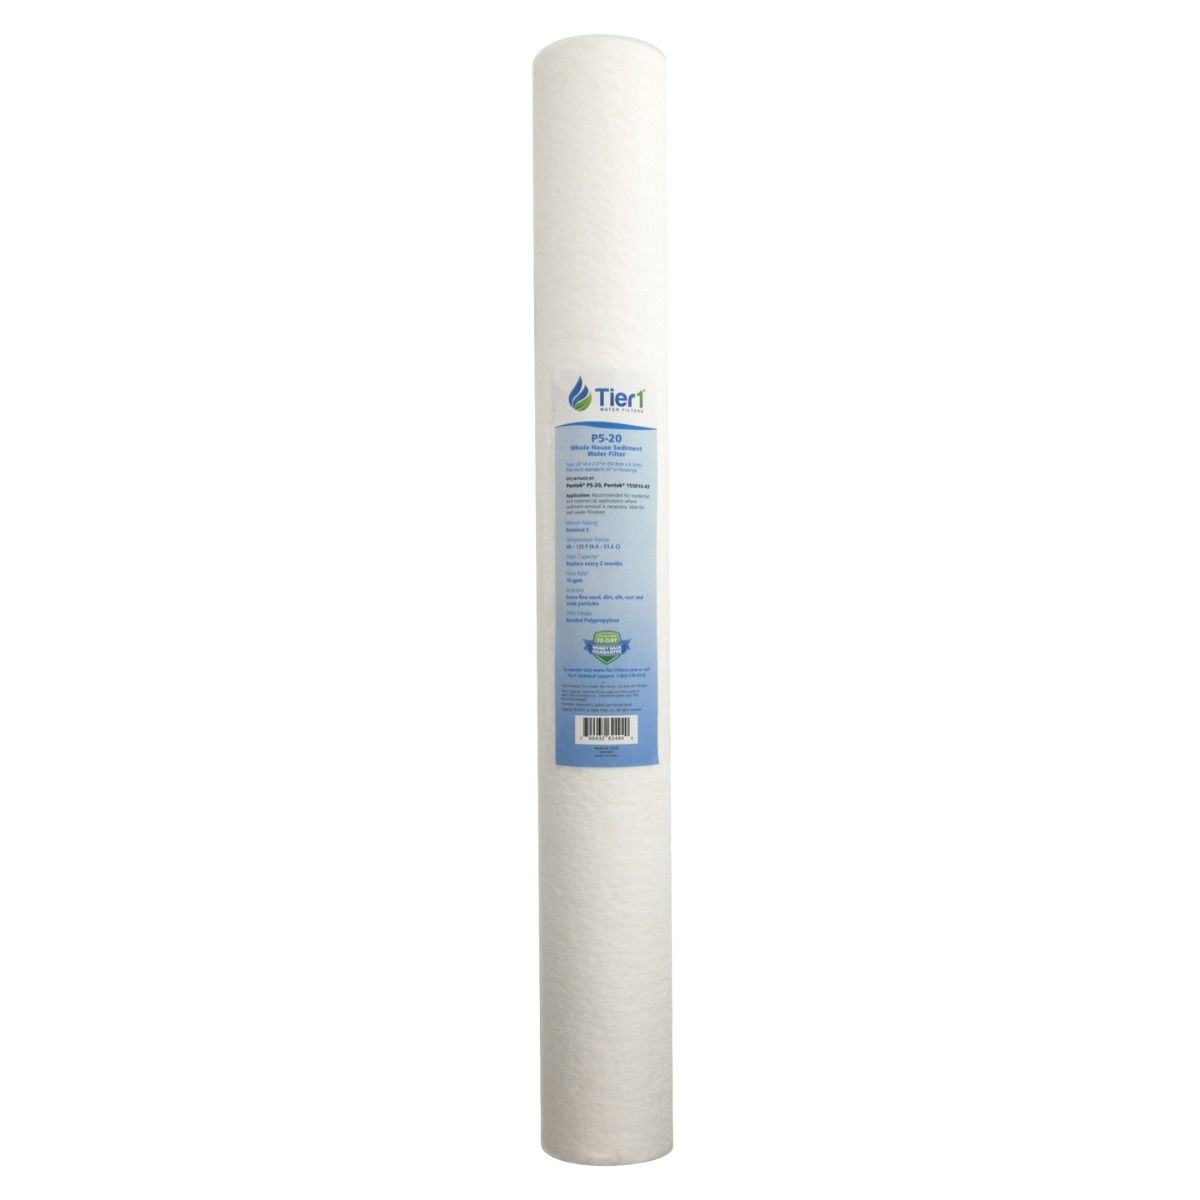 20 x 2.5 Inch Water Filters